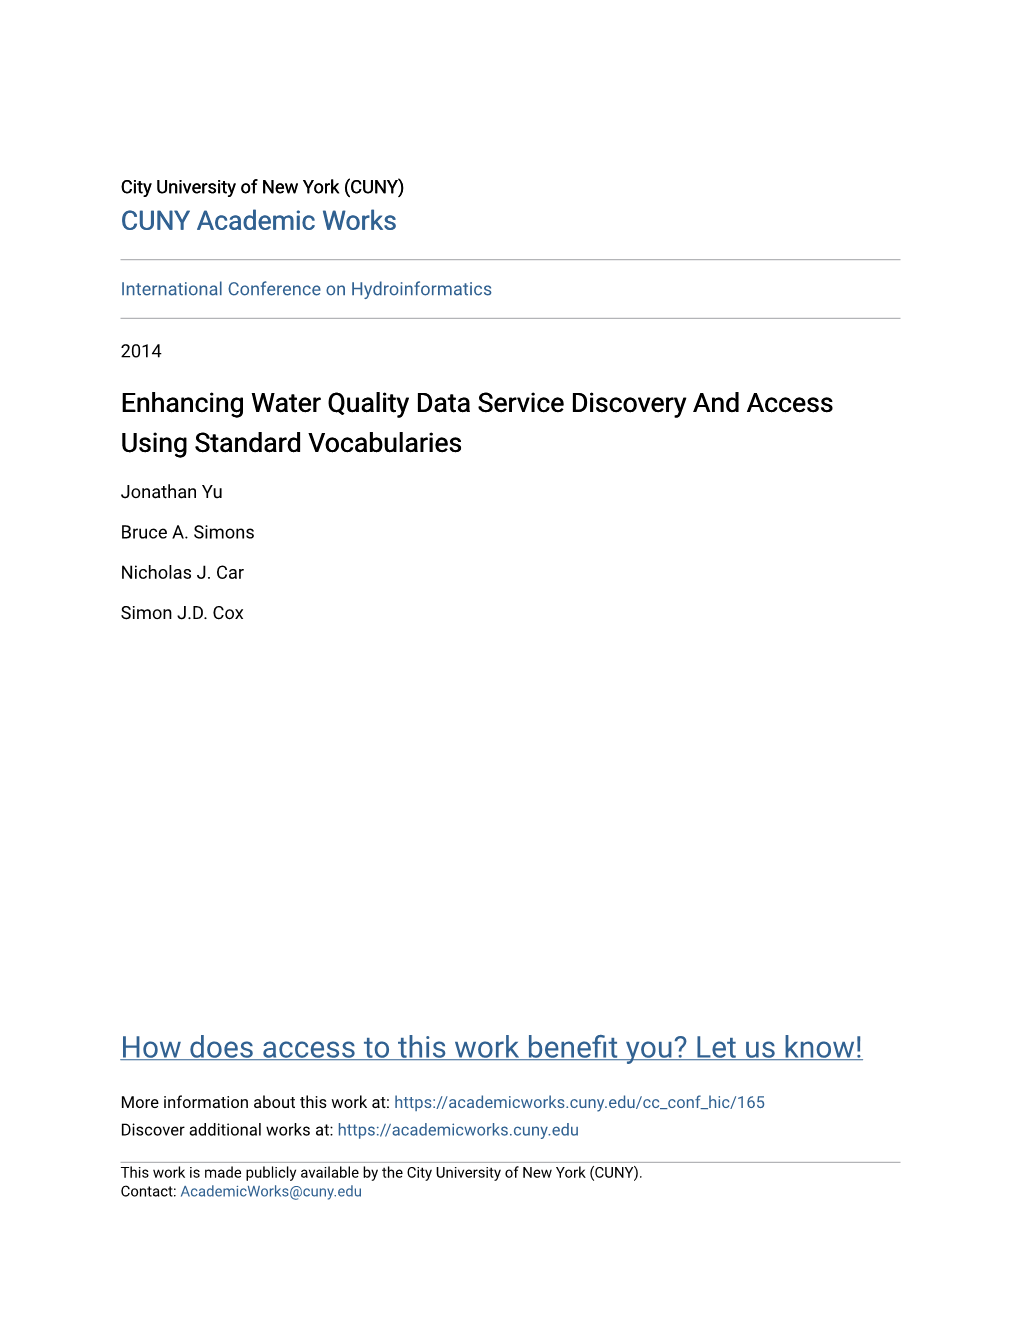 Enhancing Water Quality Data Service Discovery and Access Using Standard Vocabularies